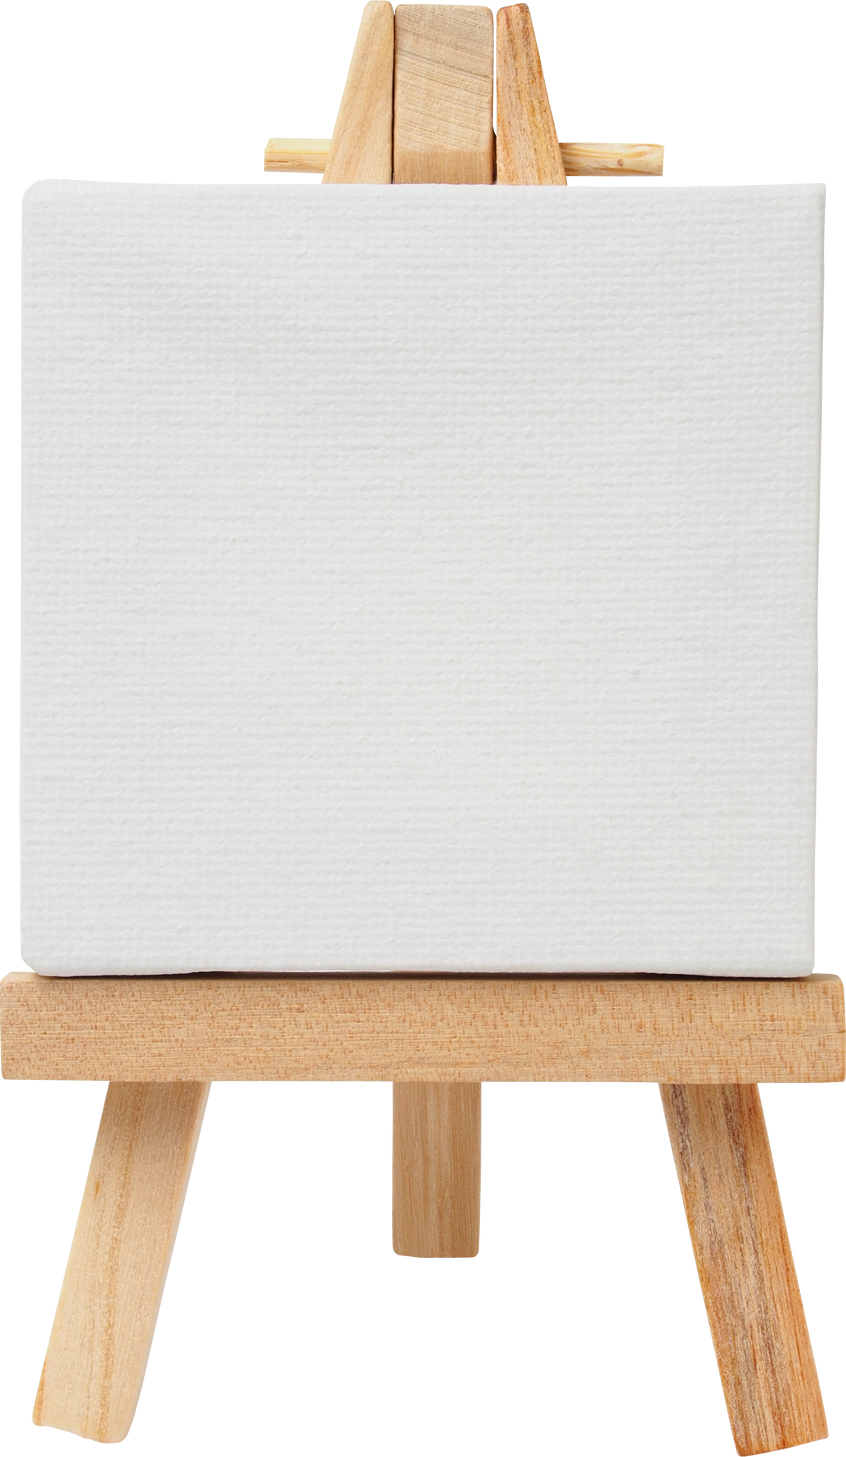 Easel and Canvas Isolated 